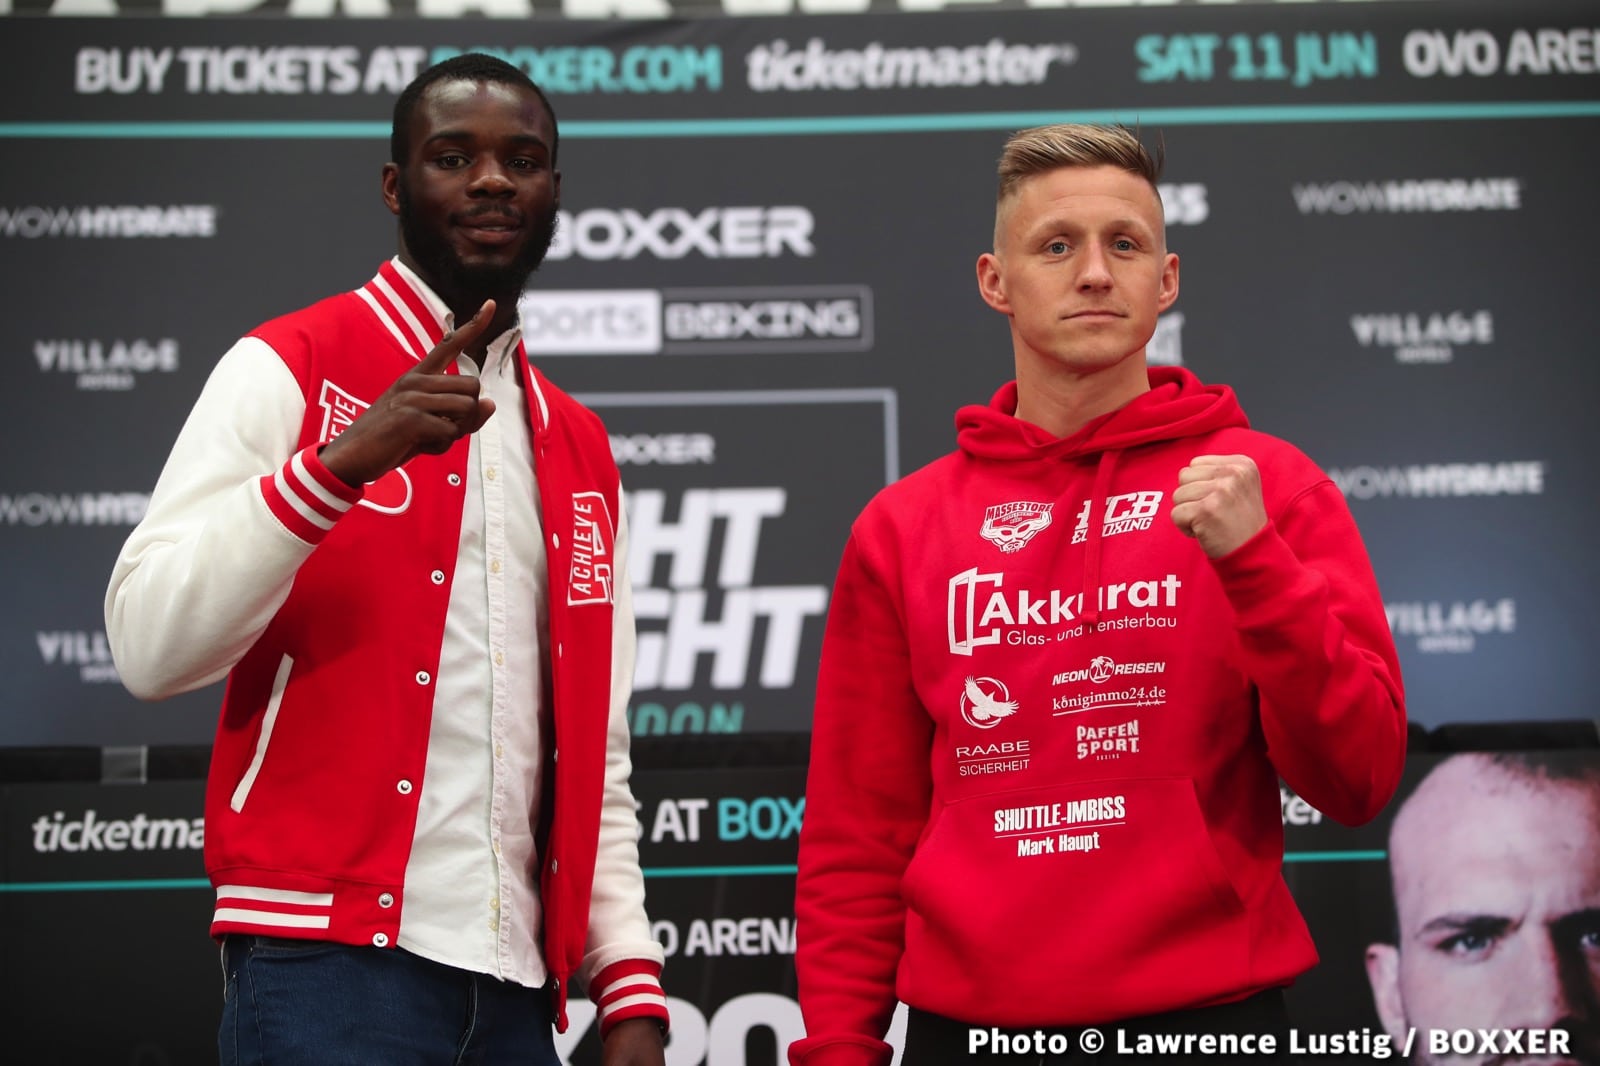 Riakporhe vs Turchi Official Sky Sports Weigh In Results